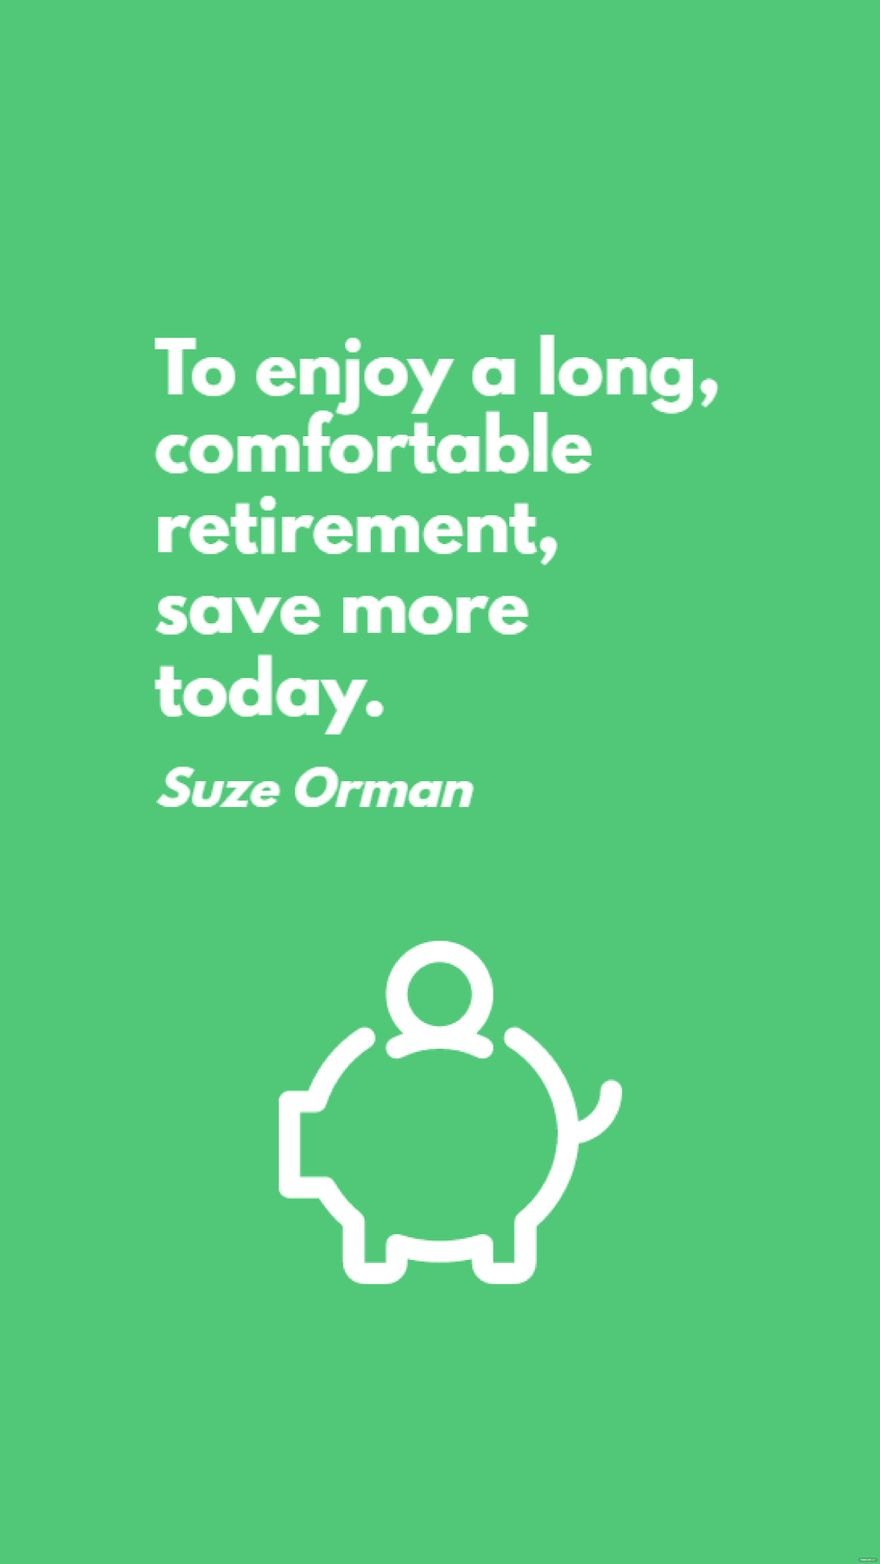 Free Suze Orman - To enjoy a long, comfortable retirement, save more today.